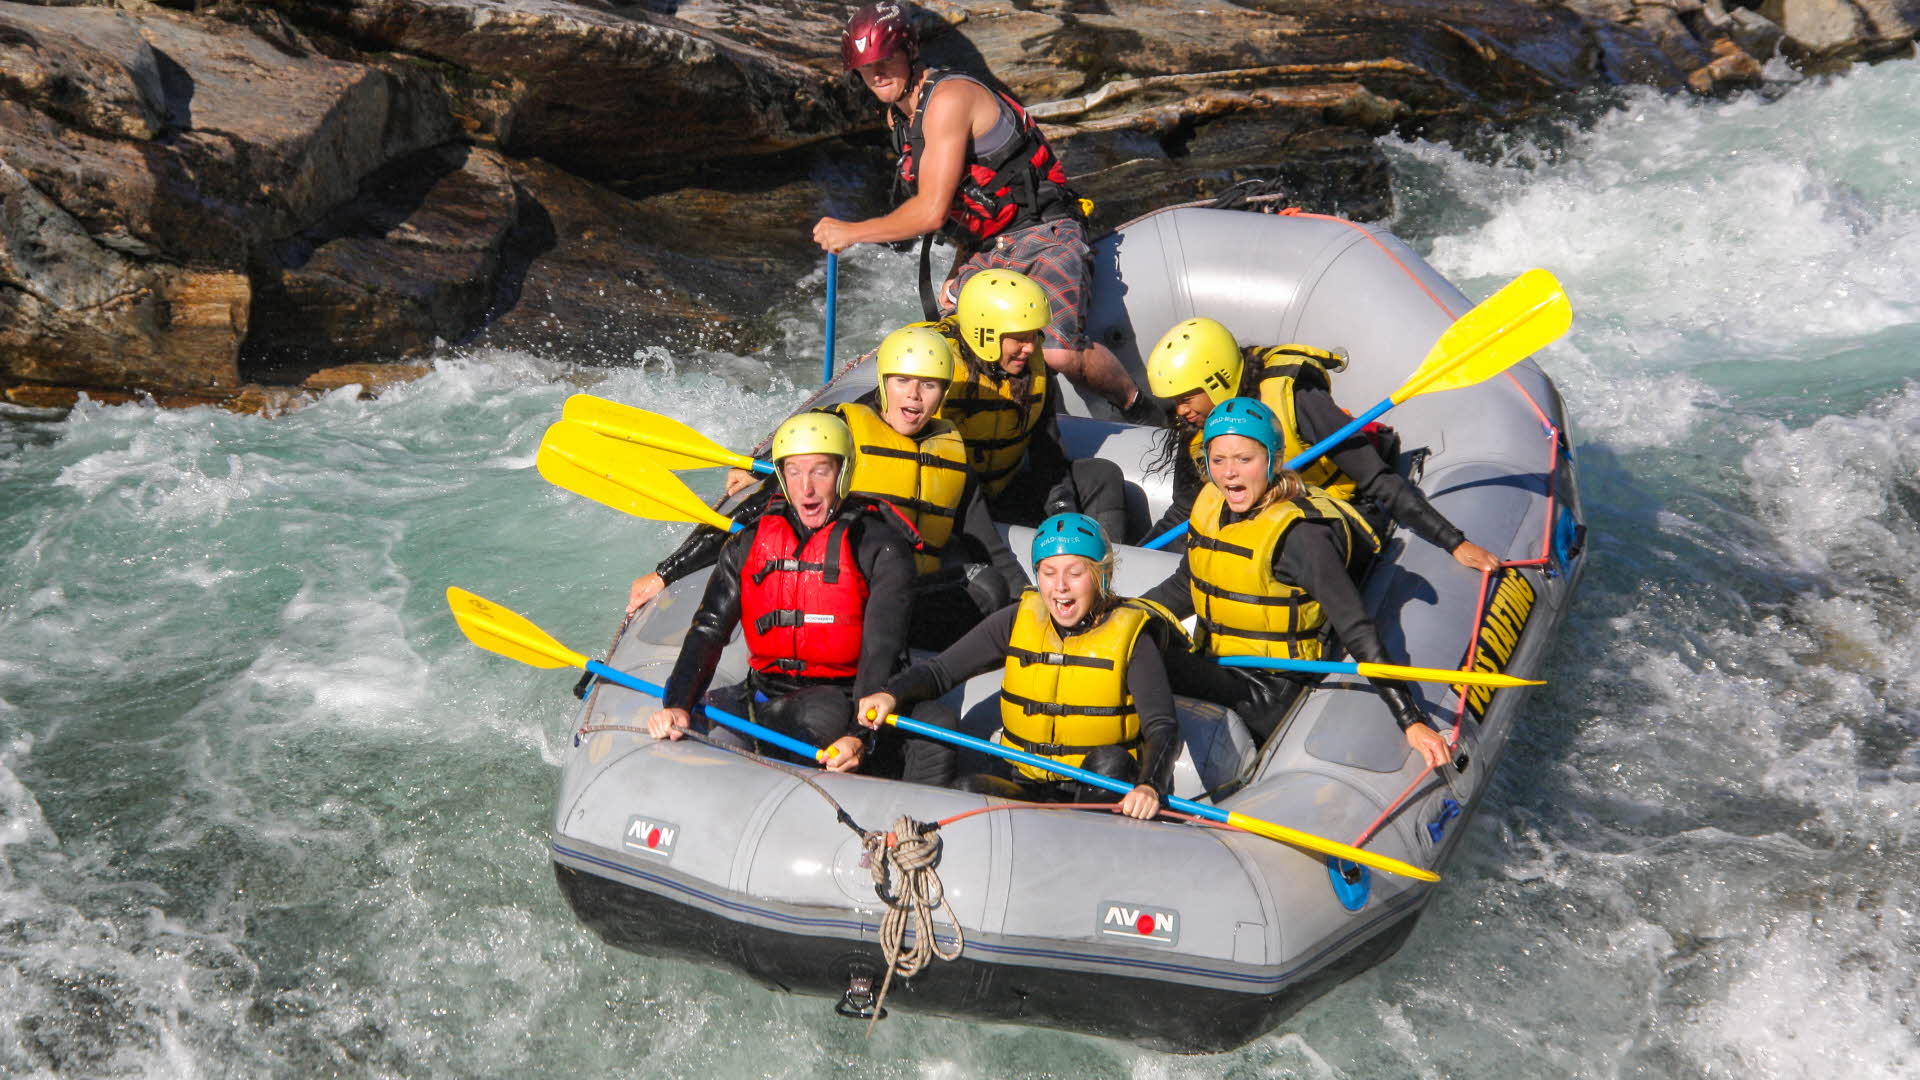 A raft with six passengers and a guide going down a rapid on a Voss river.